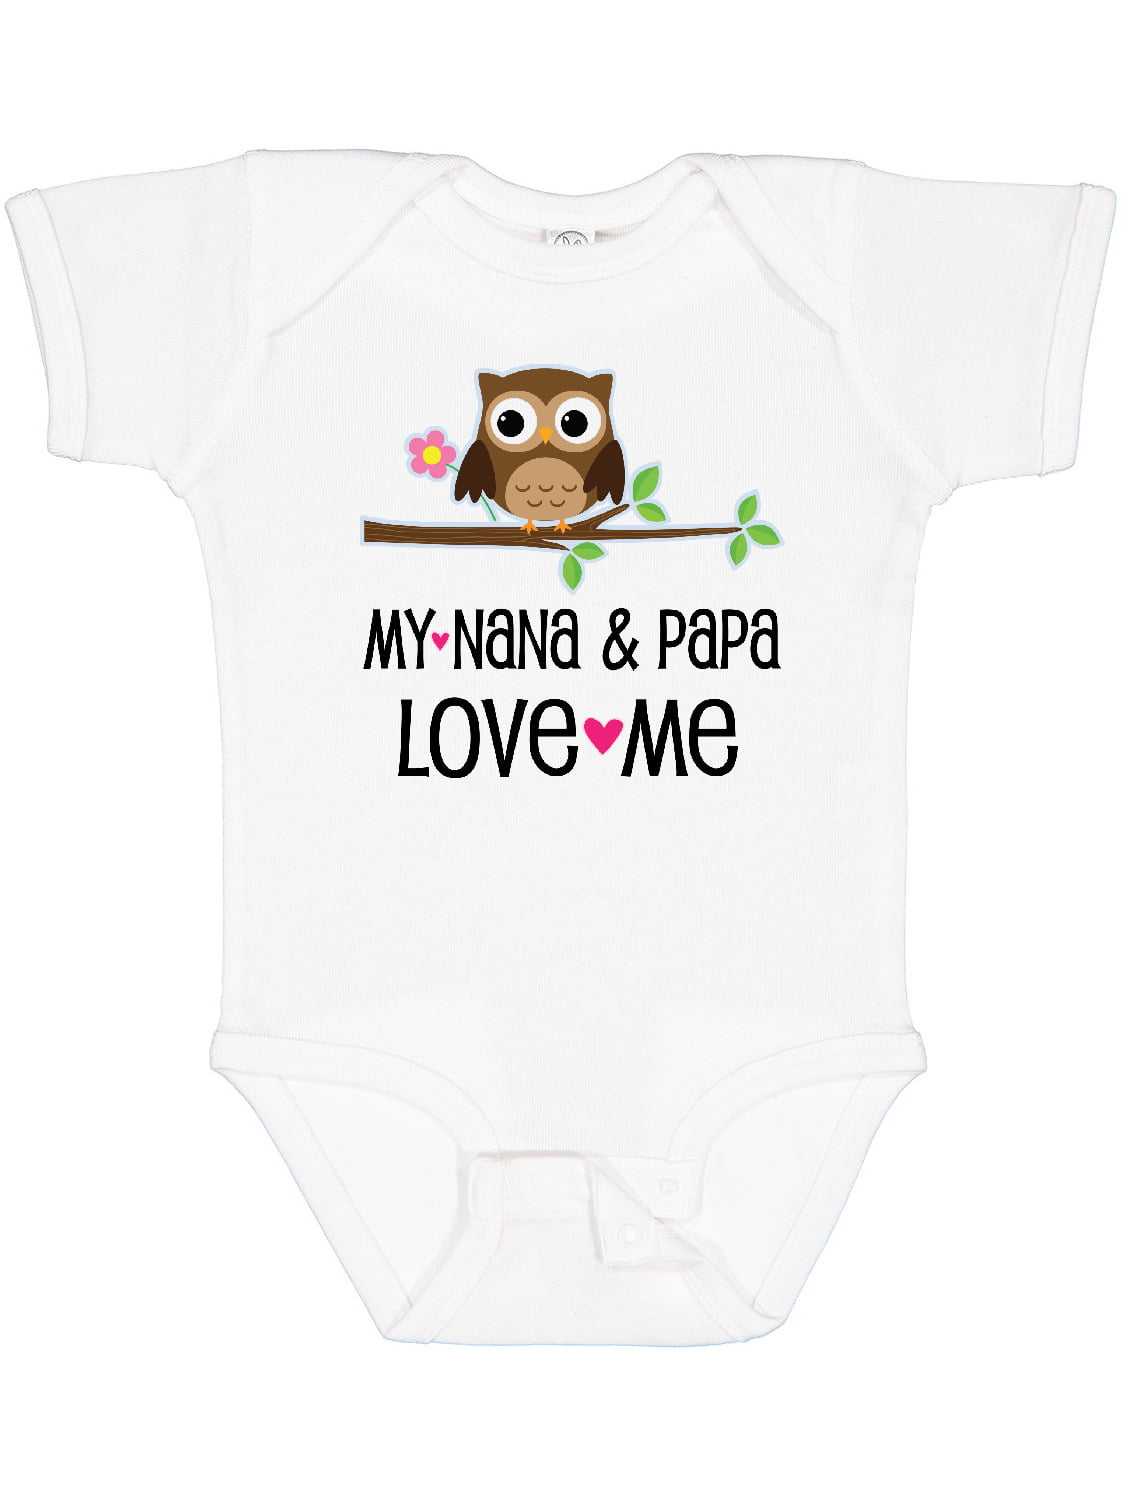 Details about   I Love Nana & Papa Heart Shaped Hands Gloves Vacation Family  Infant Bodysuit